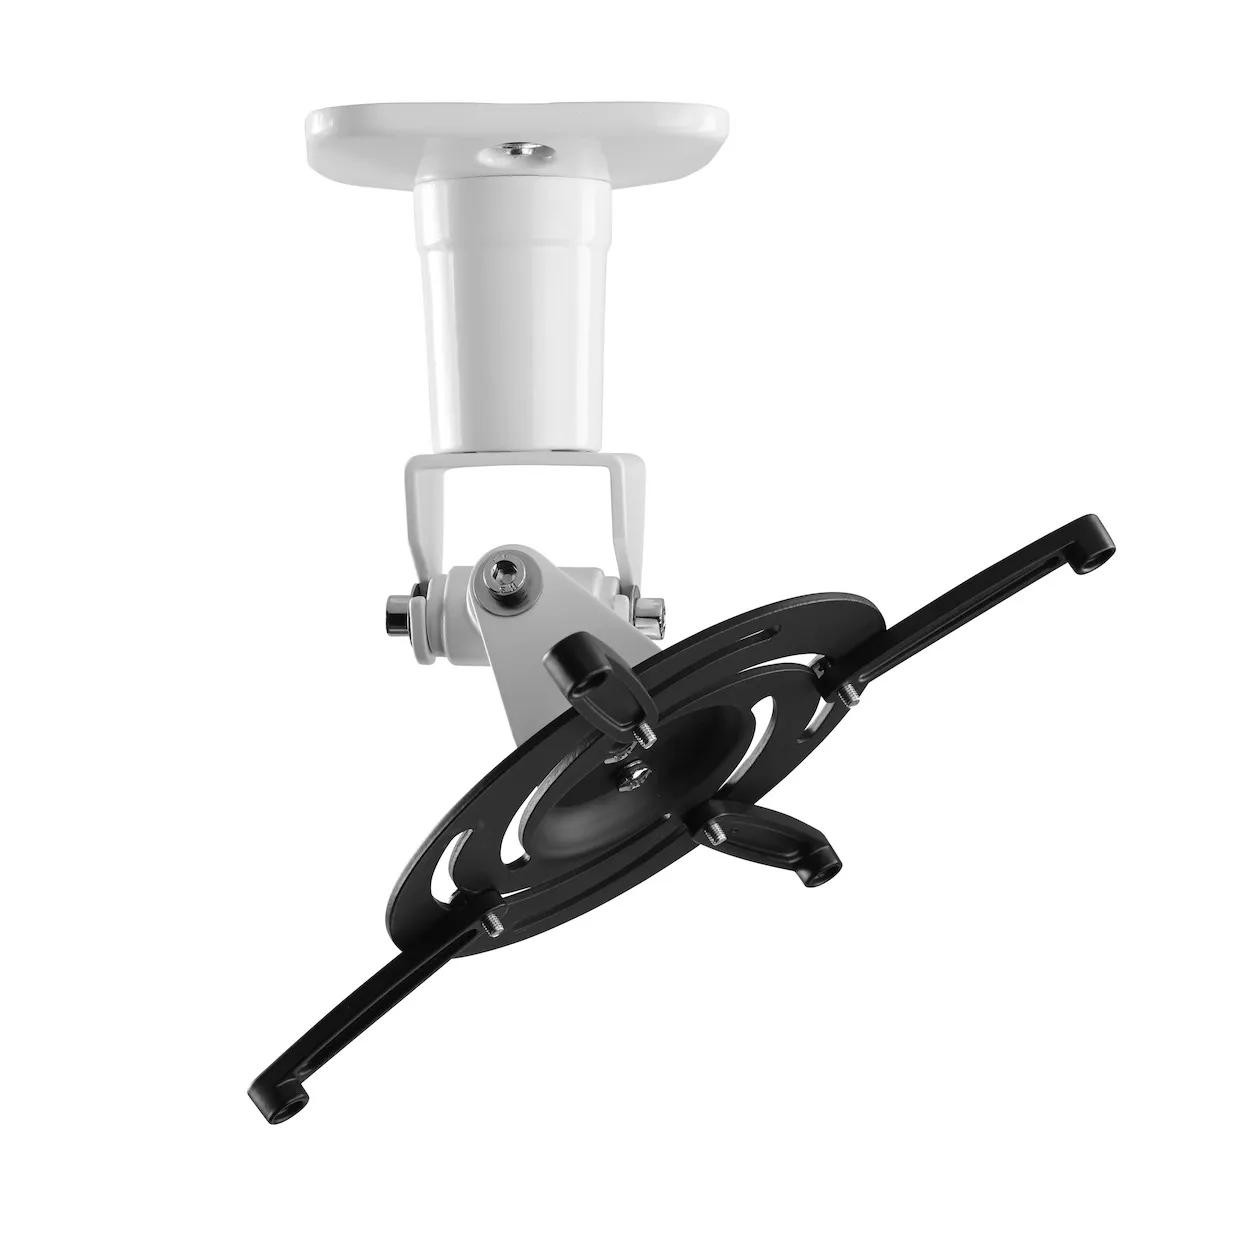 OneForAll WM5320 projector mount